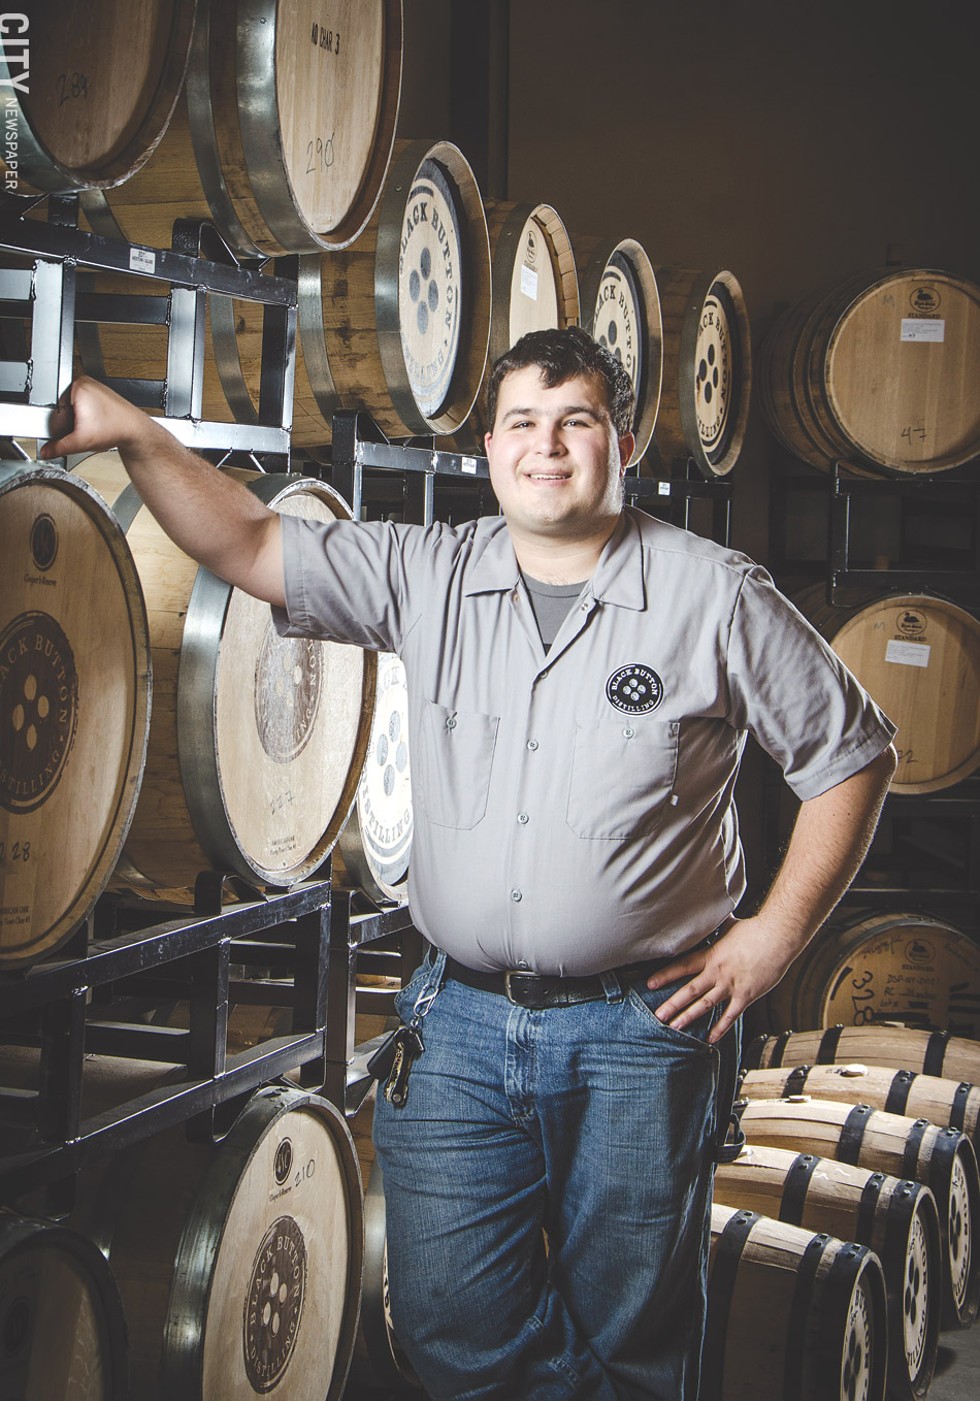 Jason Barrett named his distillery after his family's button factory. - PHOTO BY MARK CHAMBERLIN